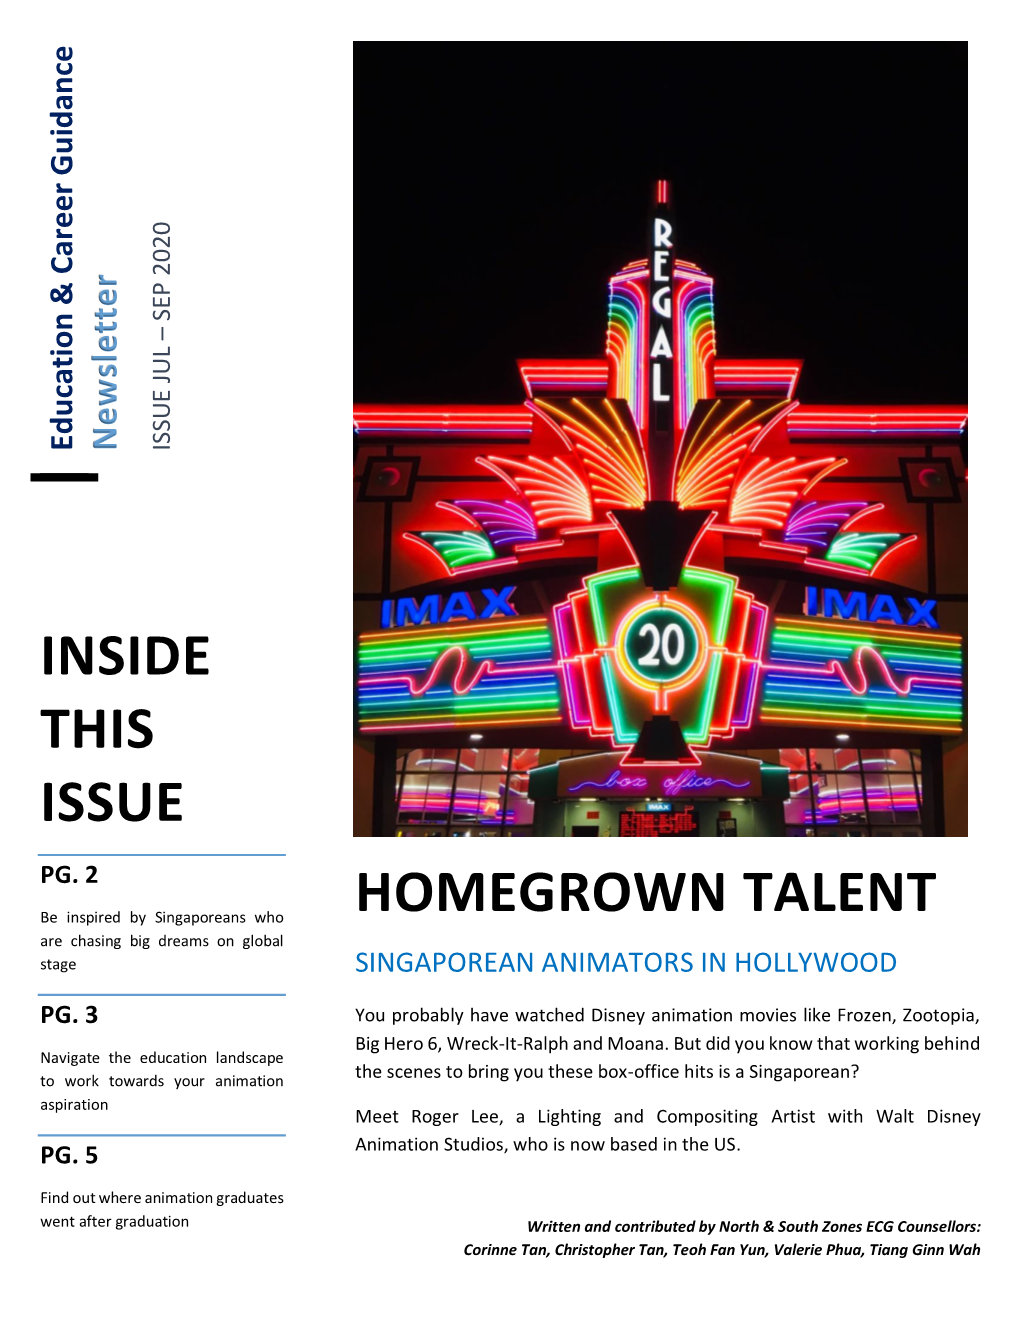 Inside This Issue Homegrown Talent